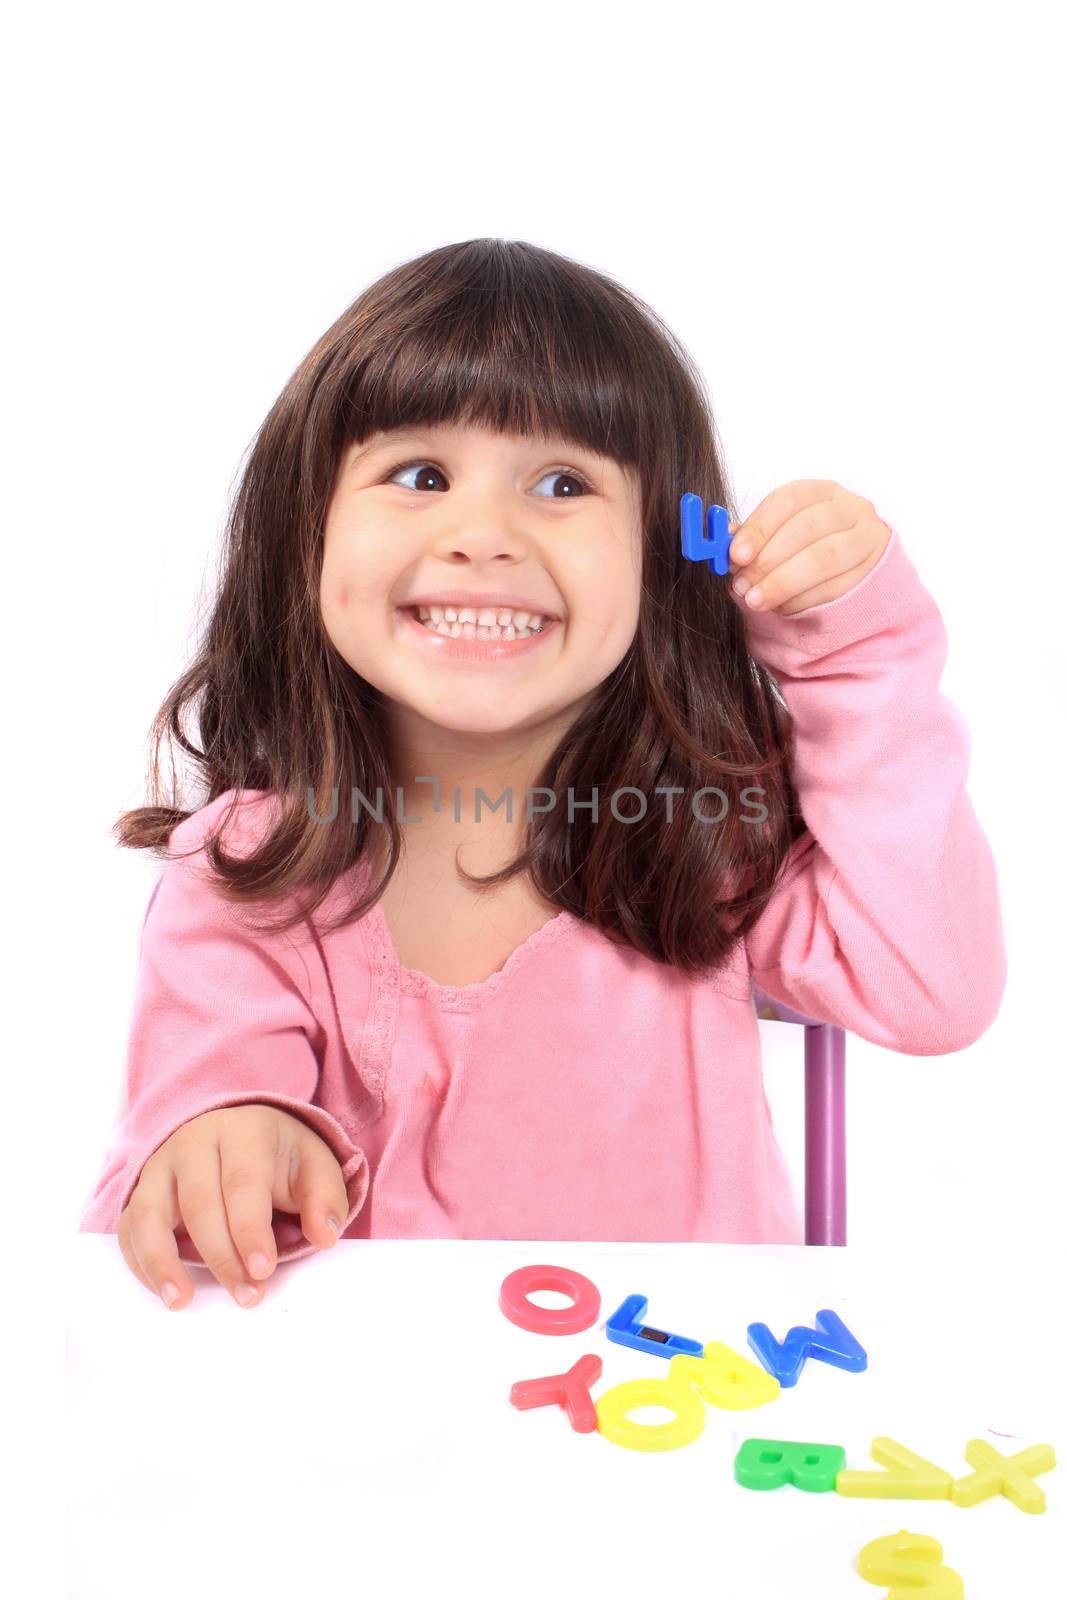 Young little preschool girl with funny expression playing with letters and holding up the number four showing her age